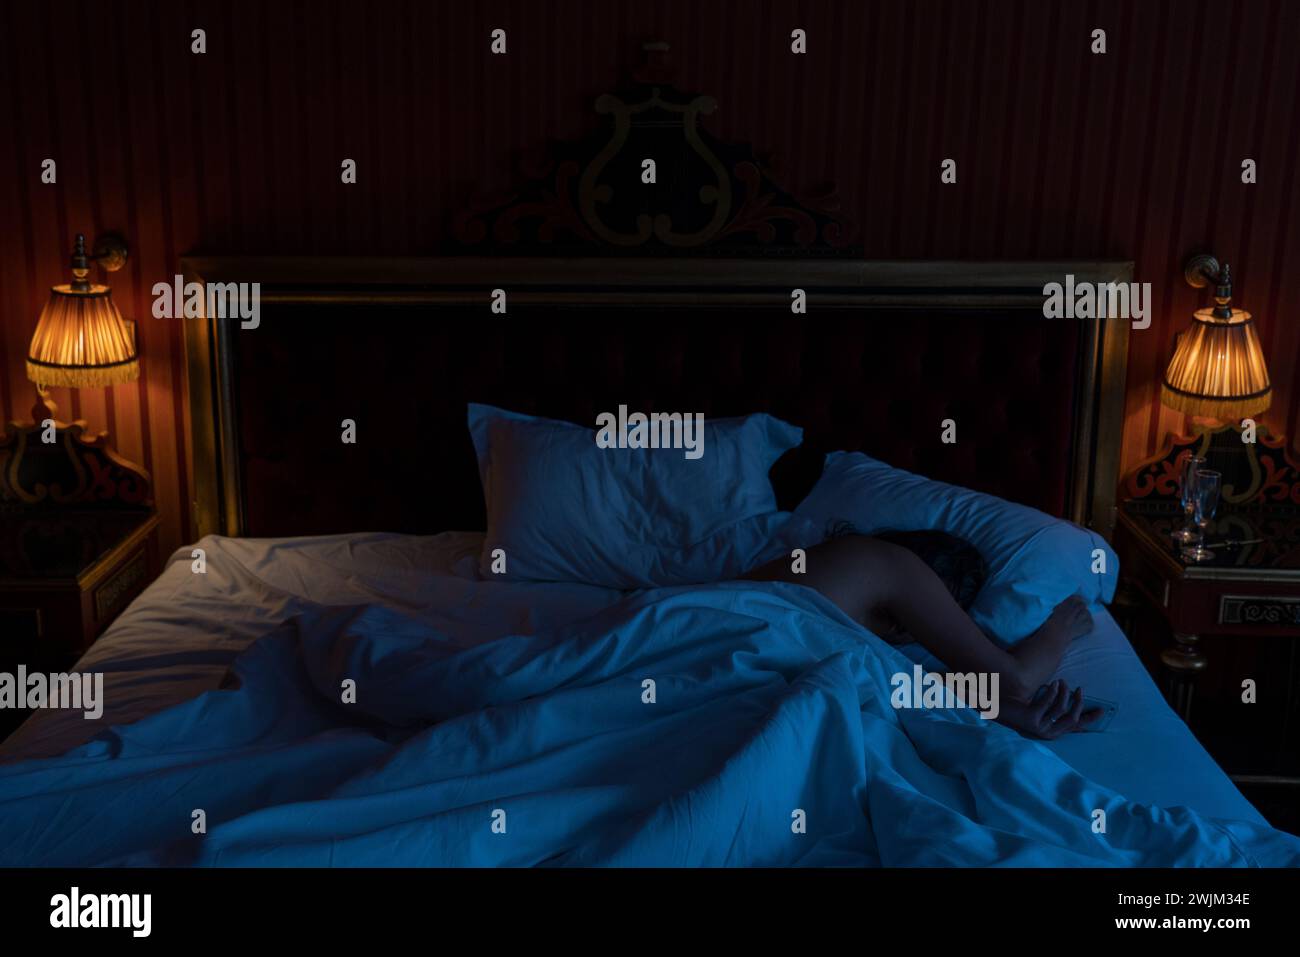 Unrecognizable person sleeping in bed Stock Photo